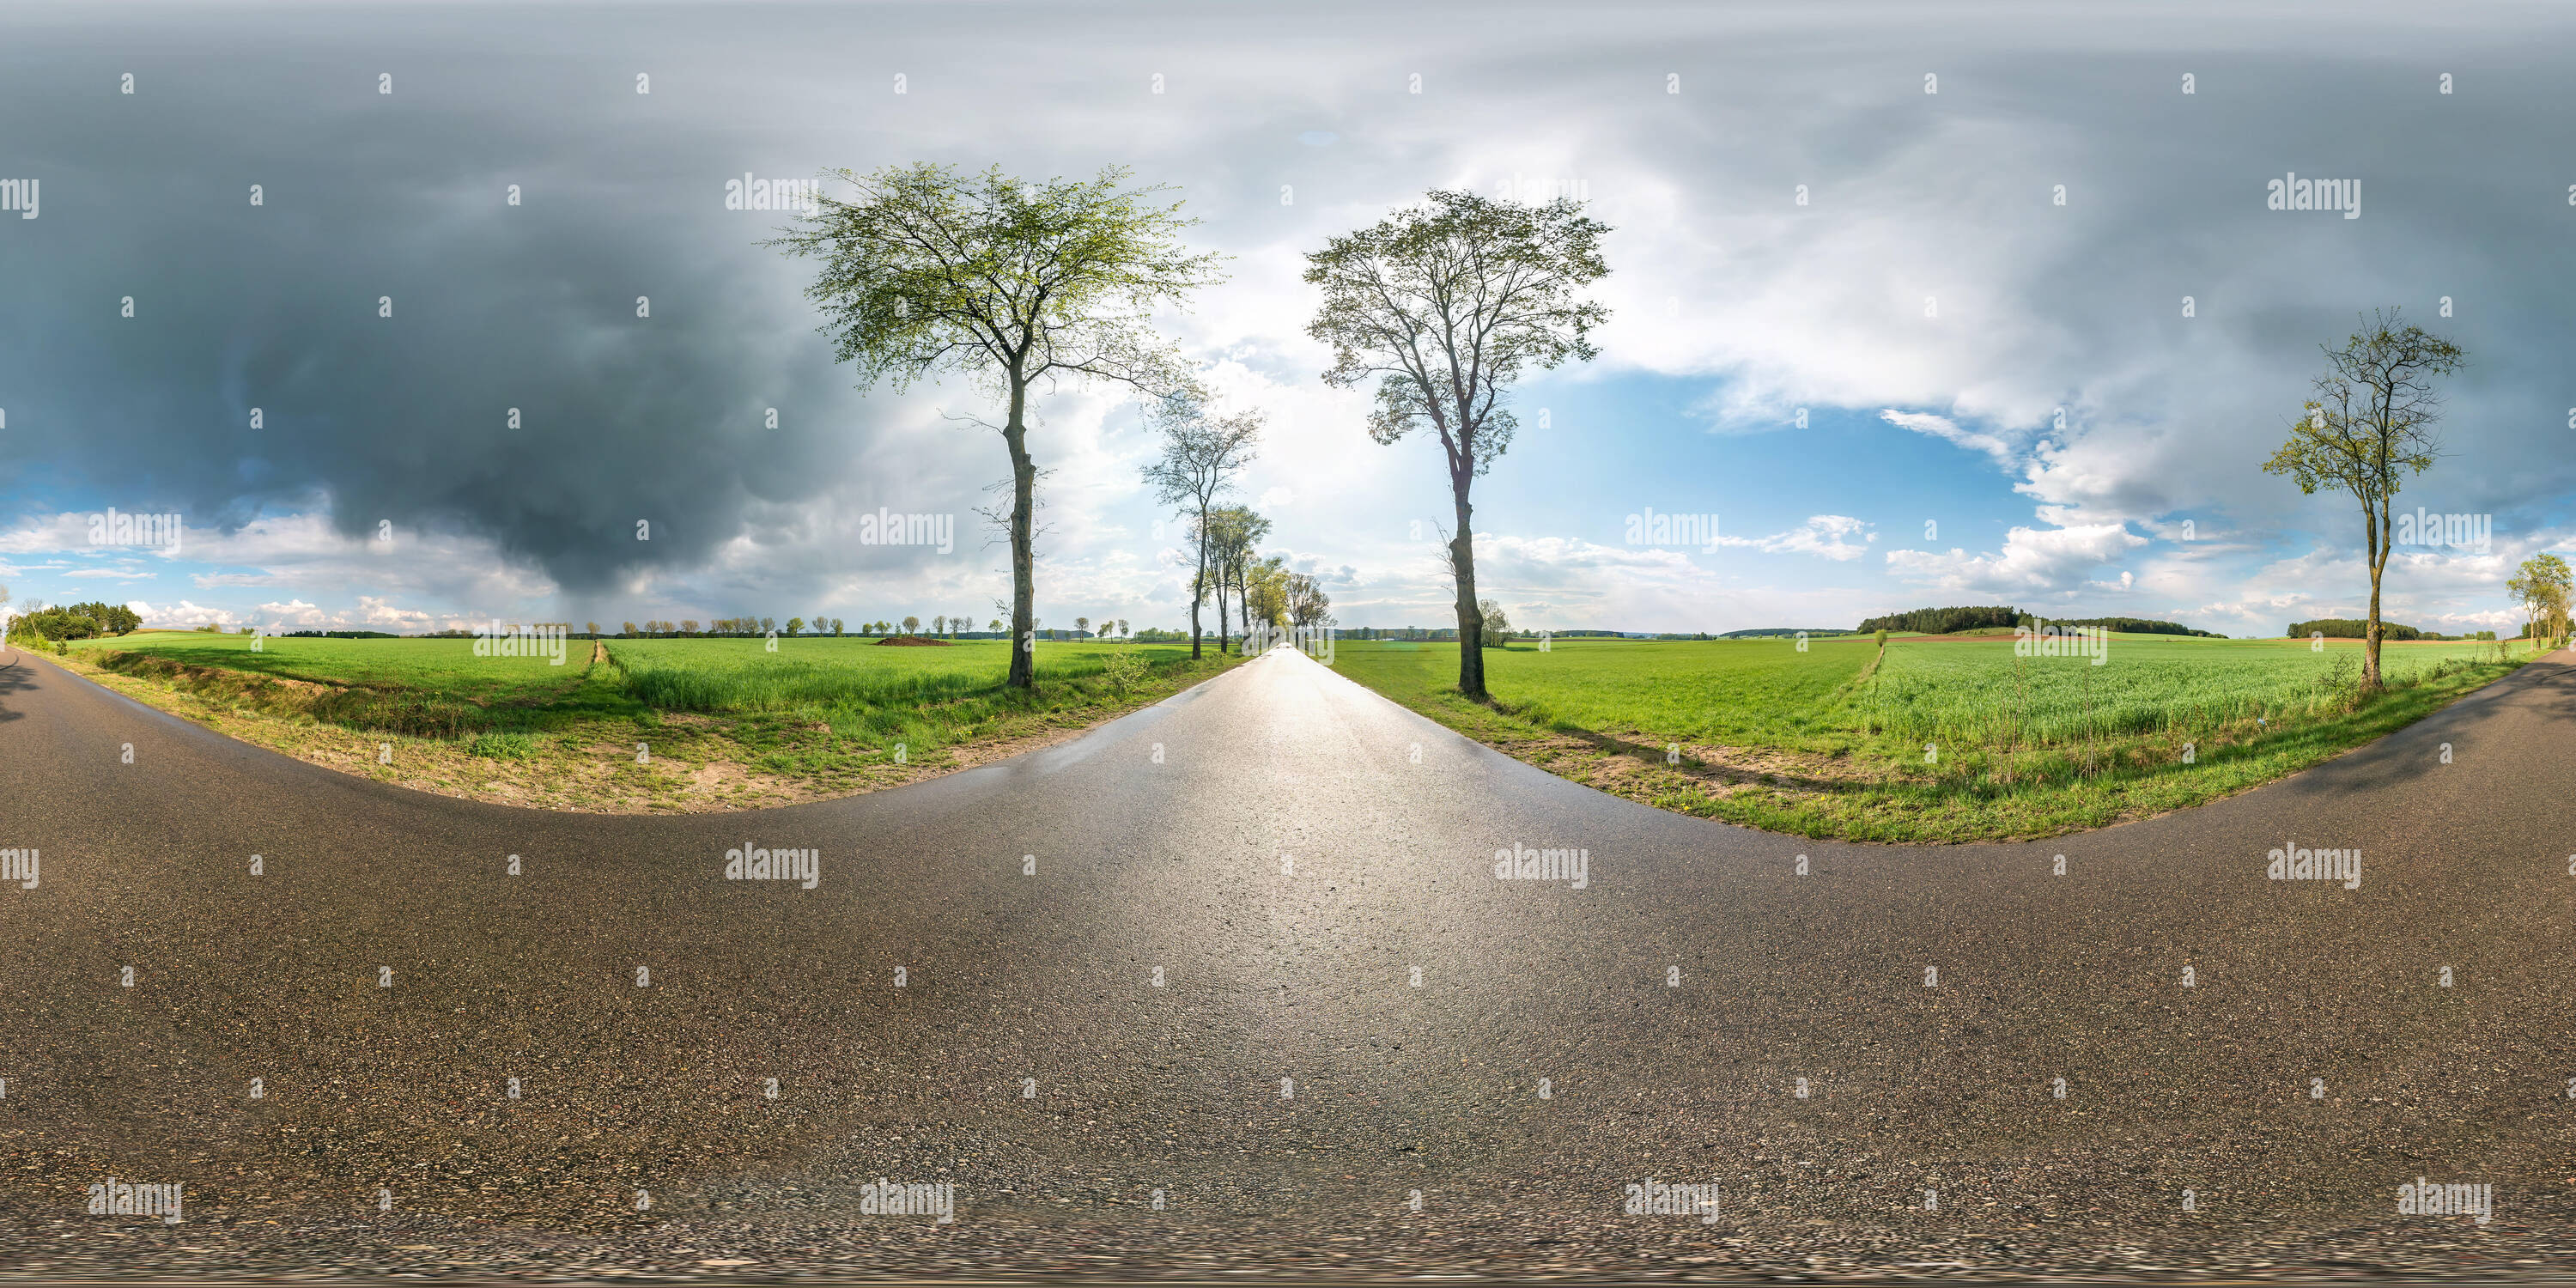 Full Spherical Seamless Panorama 360 Degrees Angle View On No Traffic Asphalt Road Among Alley And Fields With Awesome Clouds After Rain In Equirectan TDDK78 